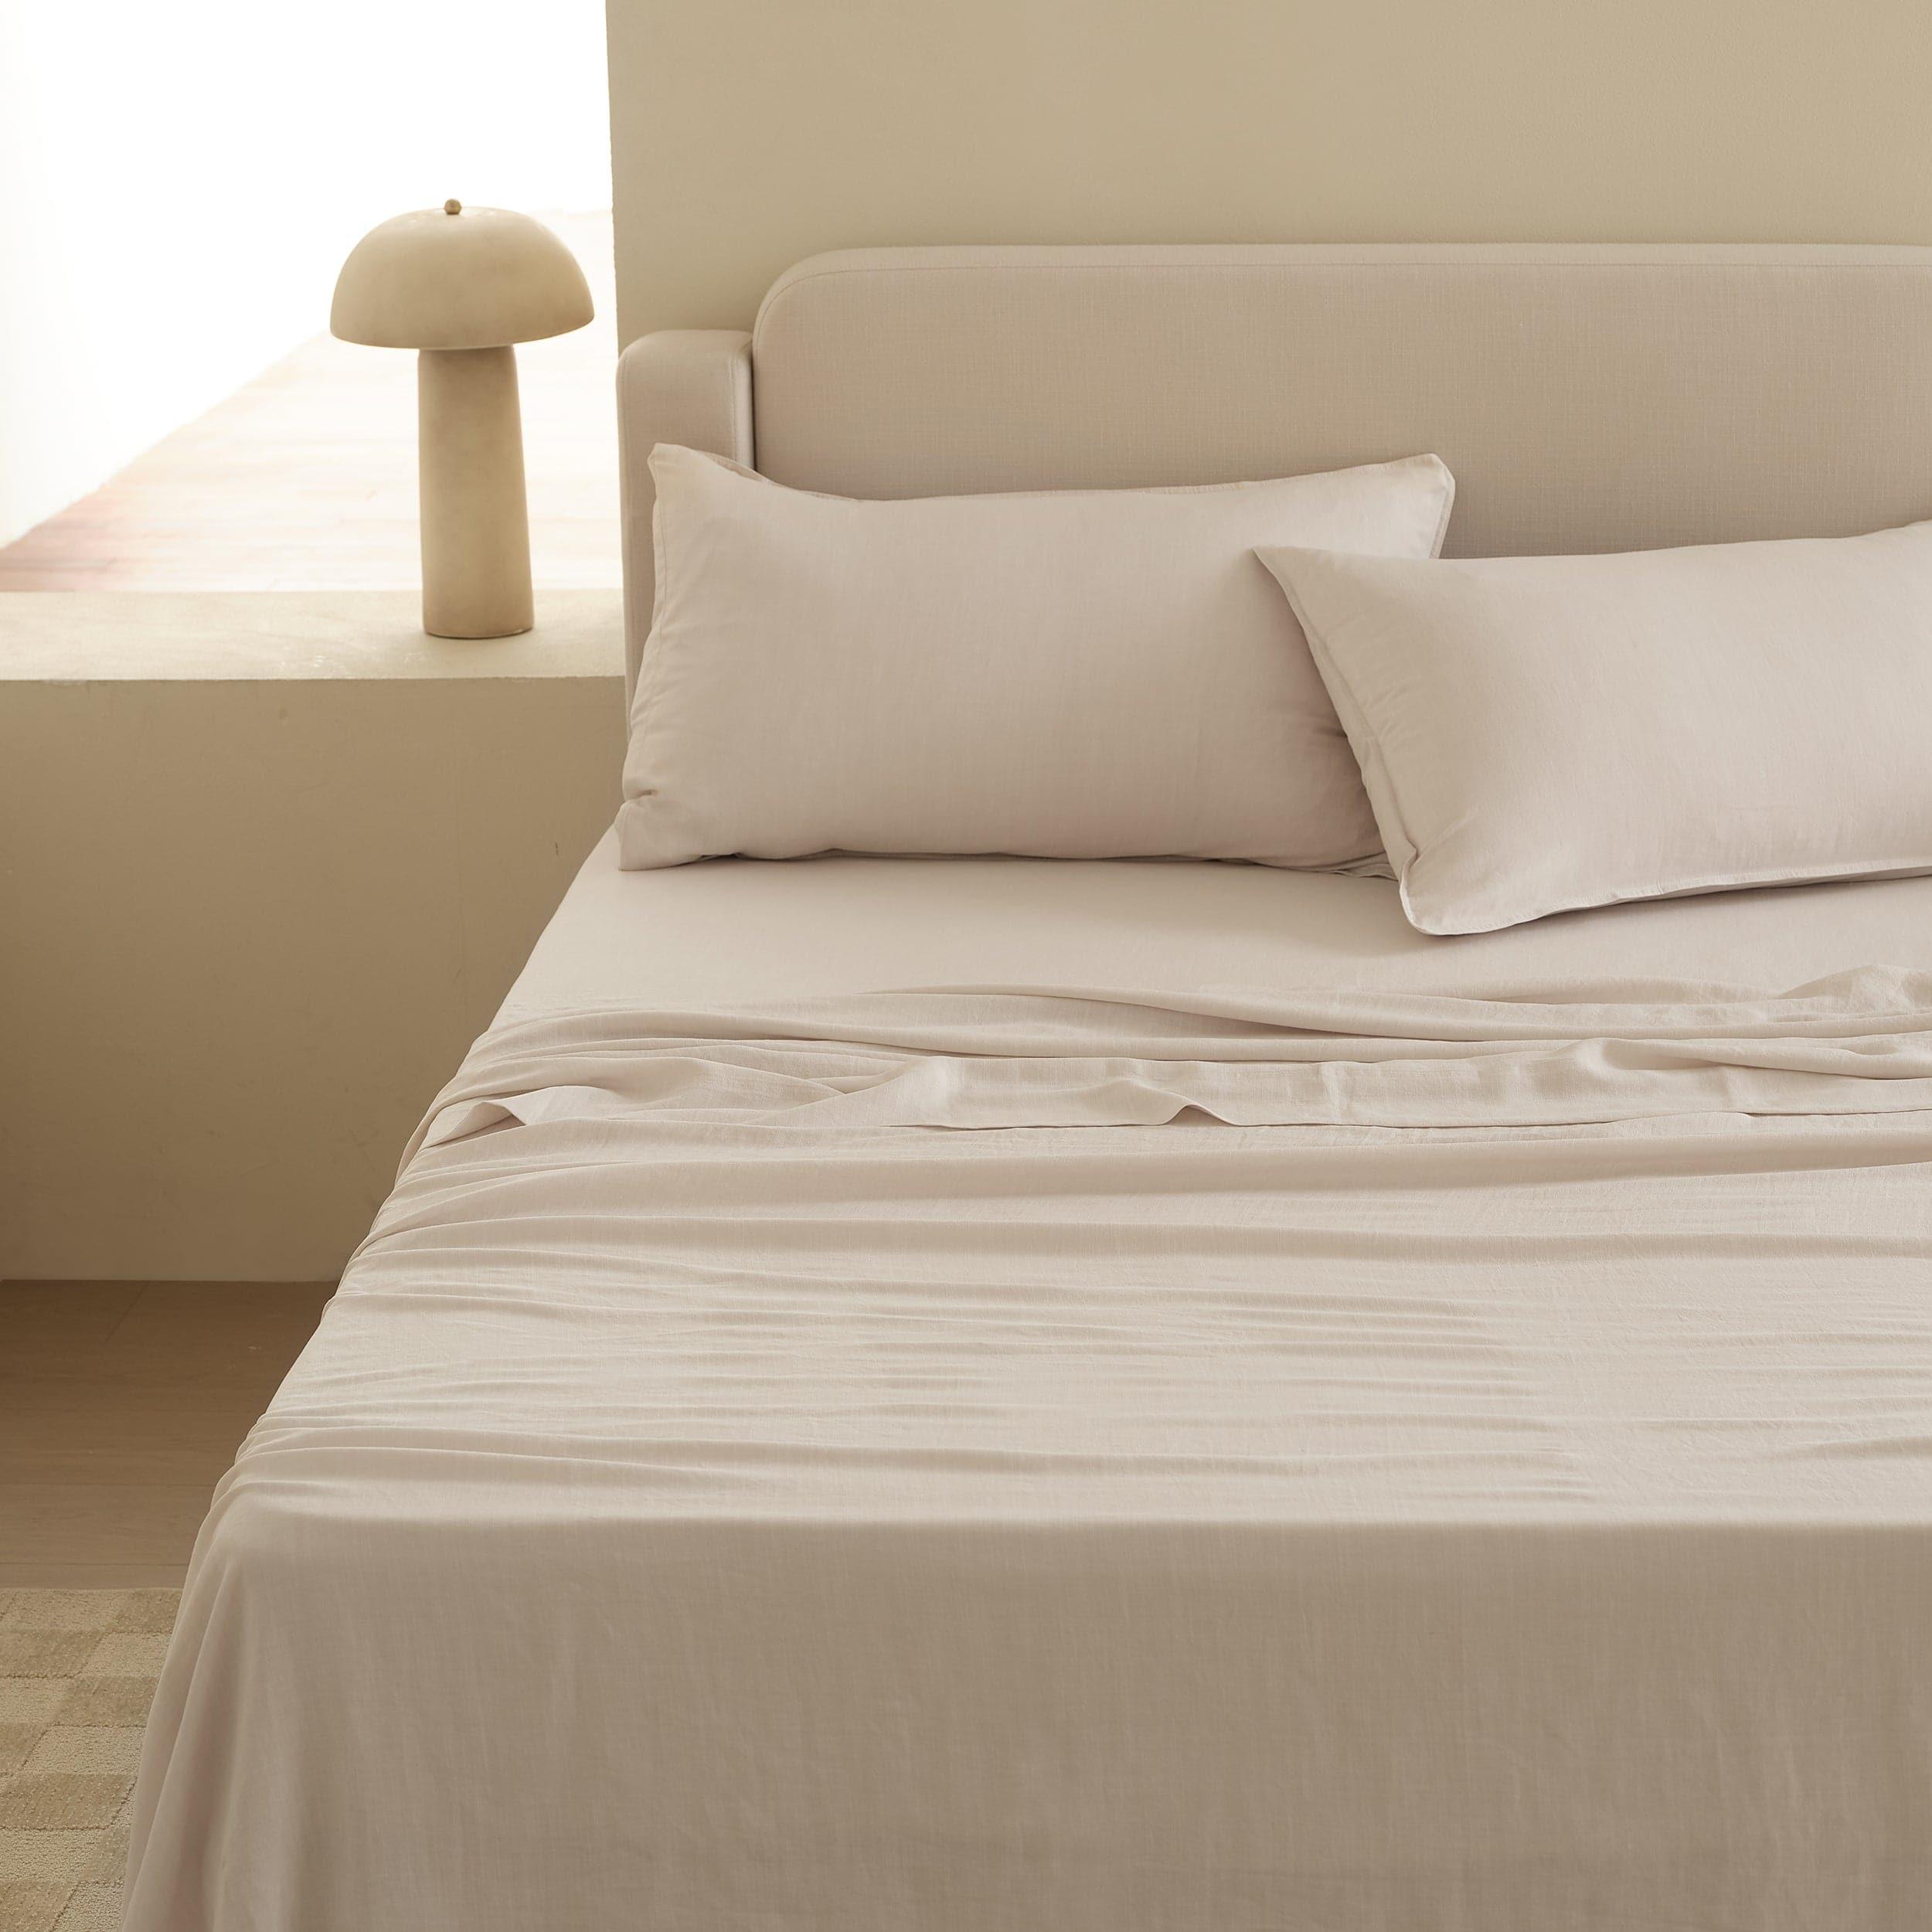 Achieve a cozy and inviting atmosphere in your bedroom with a high-quality queen size sheet set.